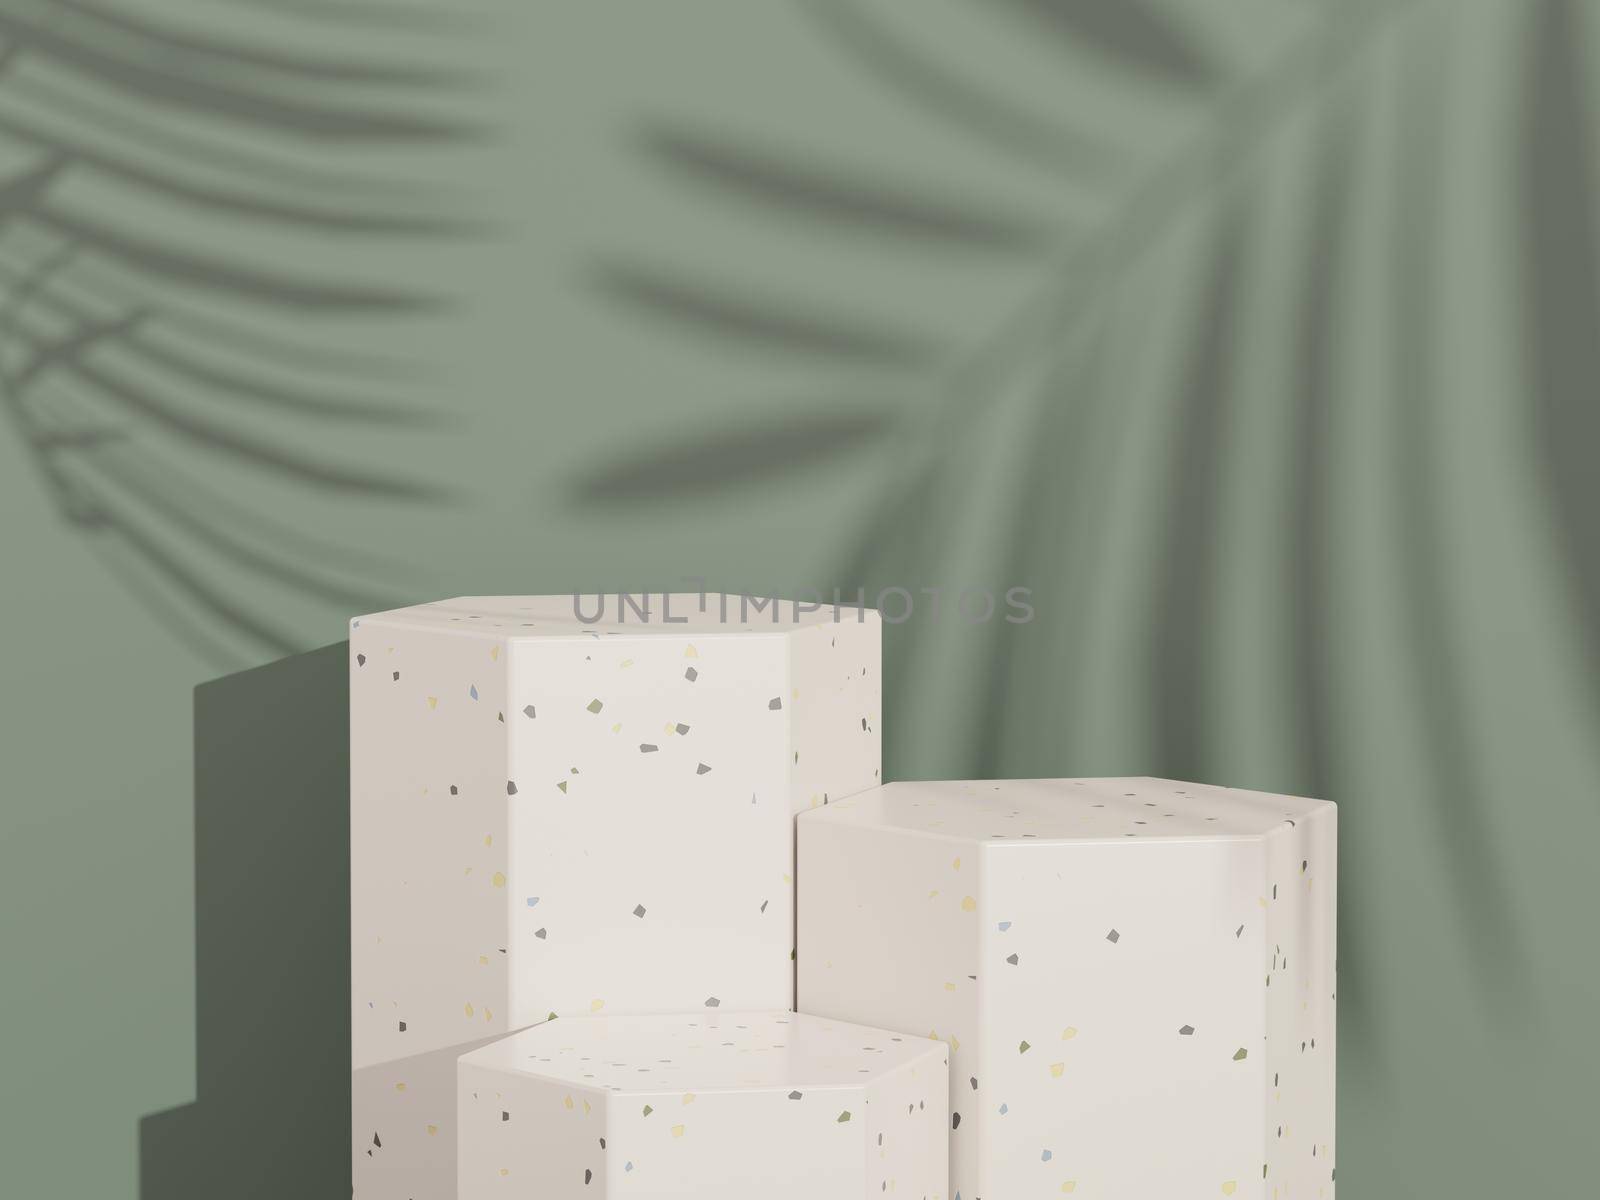 3d abstract background Terrazzo podium for product presentation and brand advertising with shadow of leave. Empty scene for mock up.